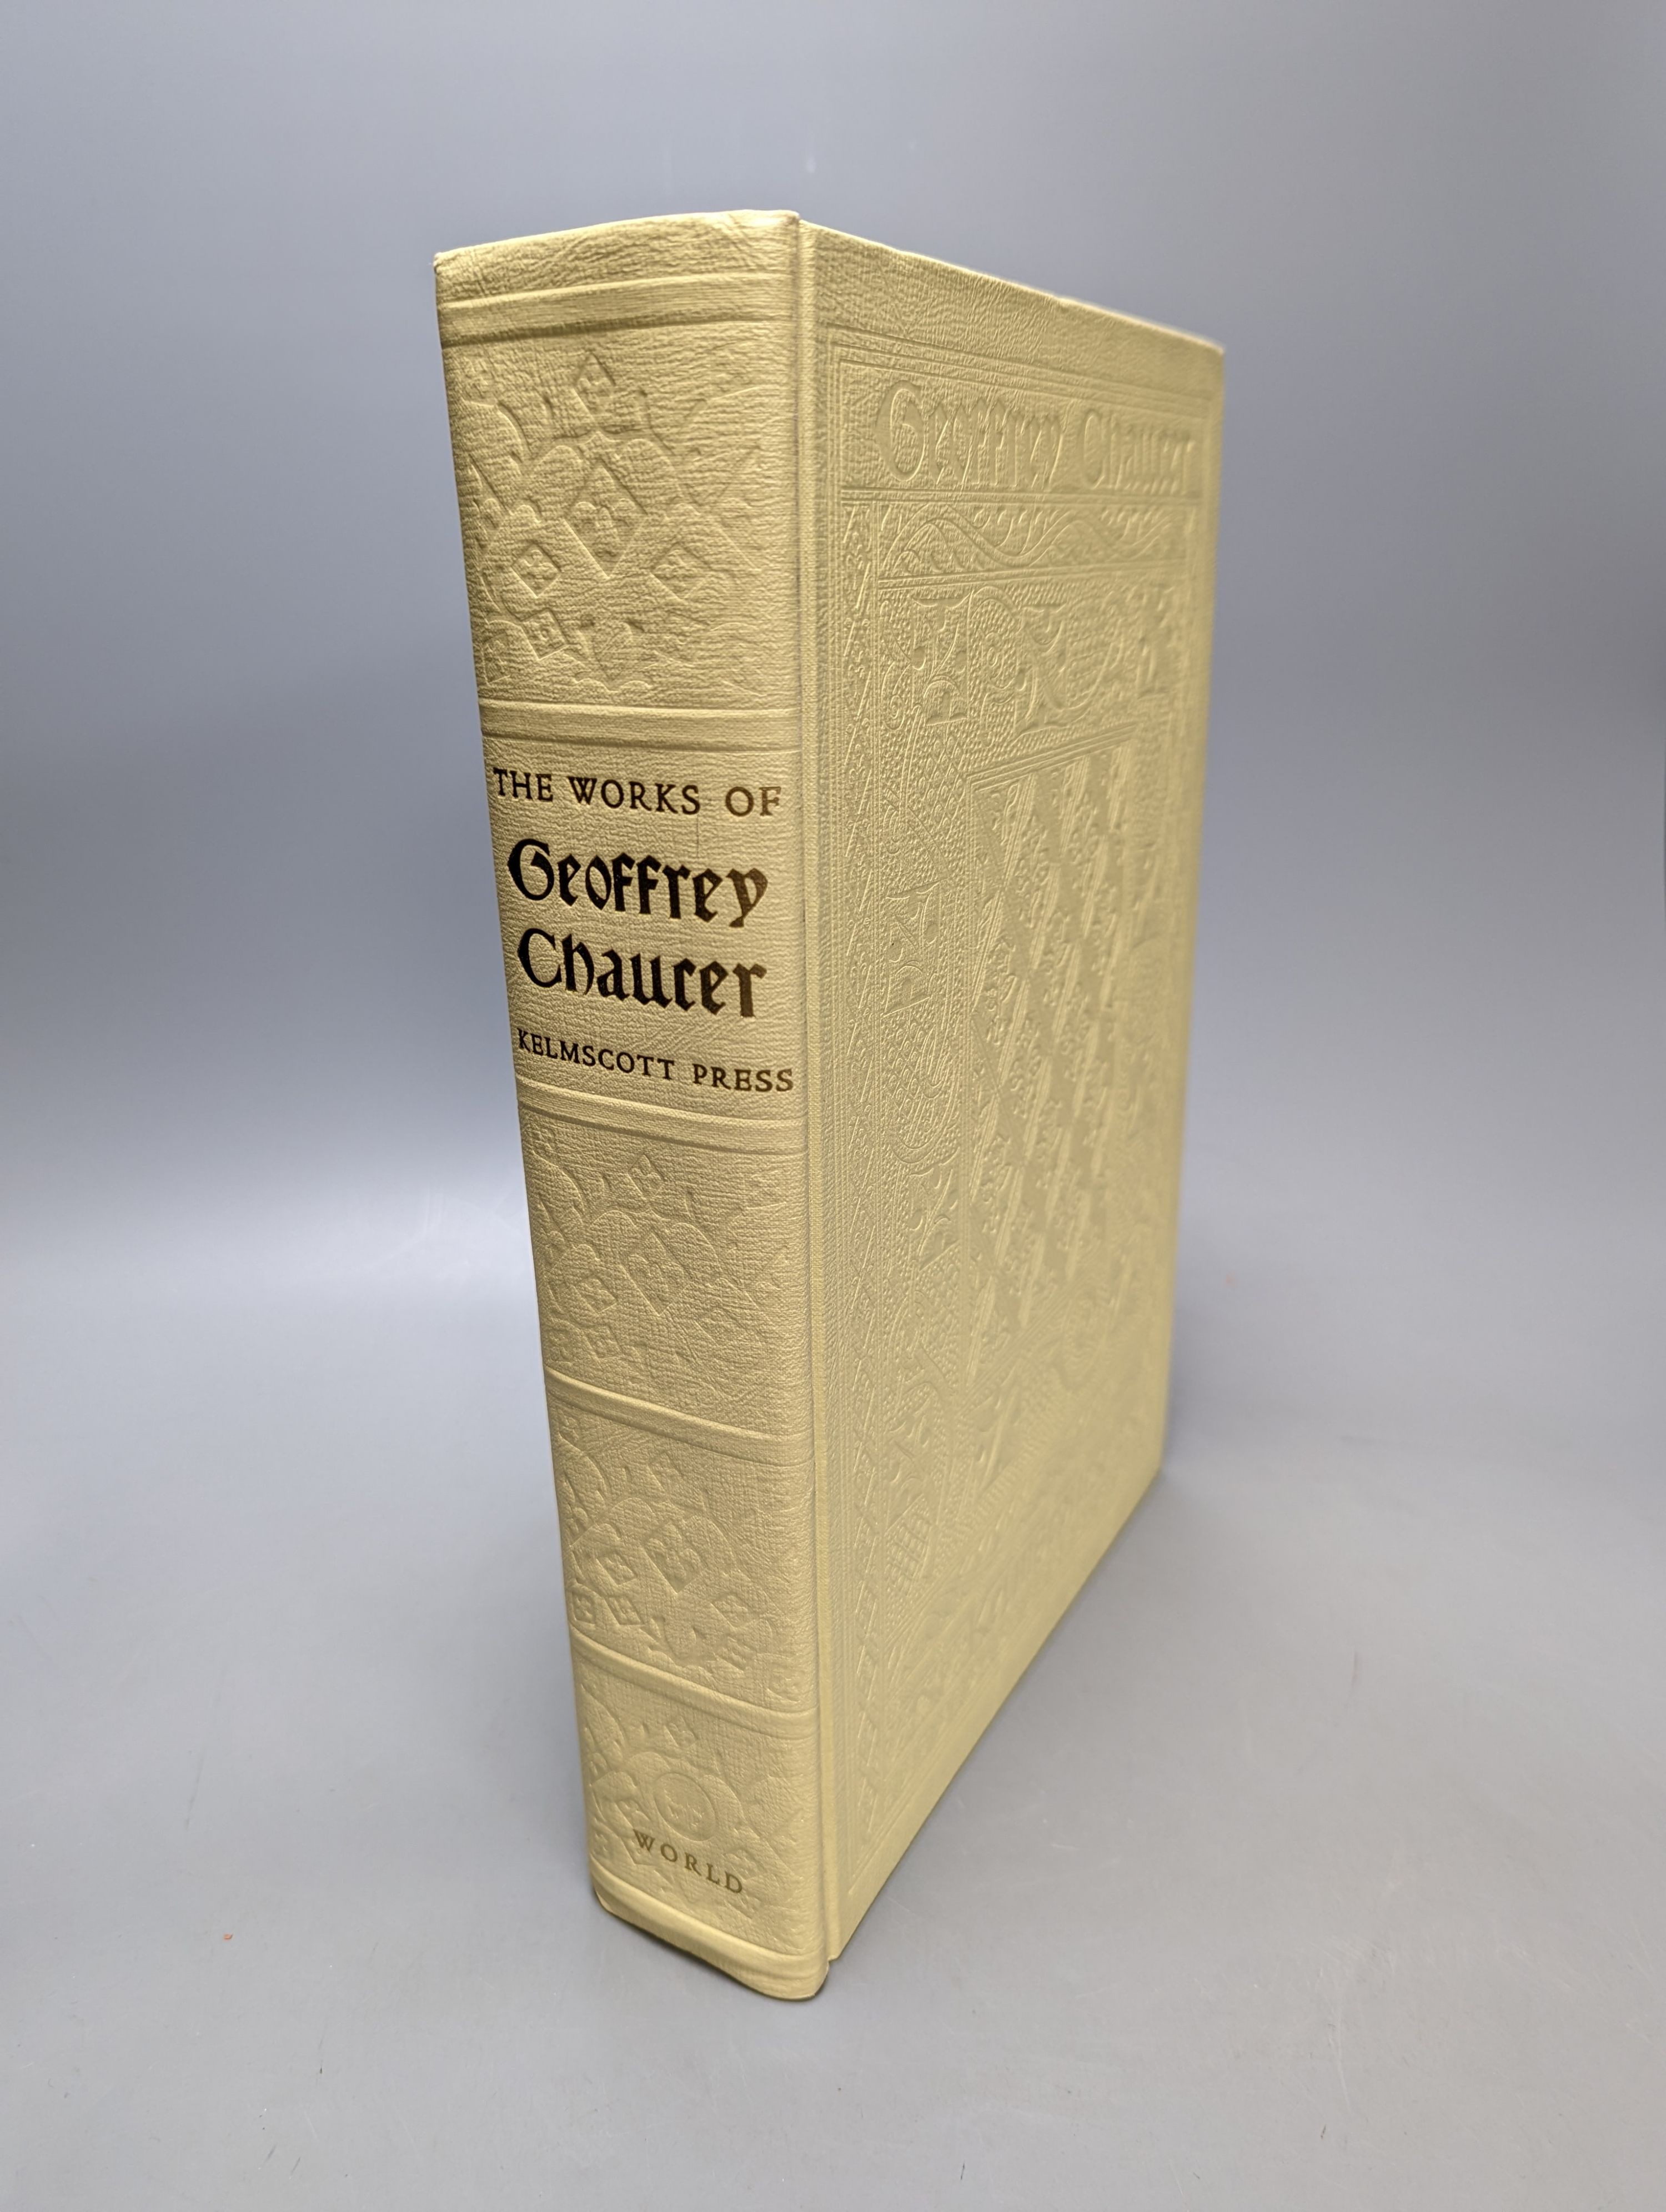 Chaucer, Geoffrey - The Works of Geoffrey Chaucer. A facsimile of the William Morris Kelmscott Chaucer. With the 87 illustrations by Edward Burne-Jones ... blind-decorated cloth